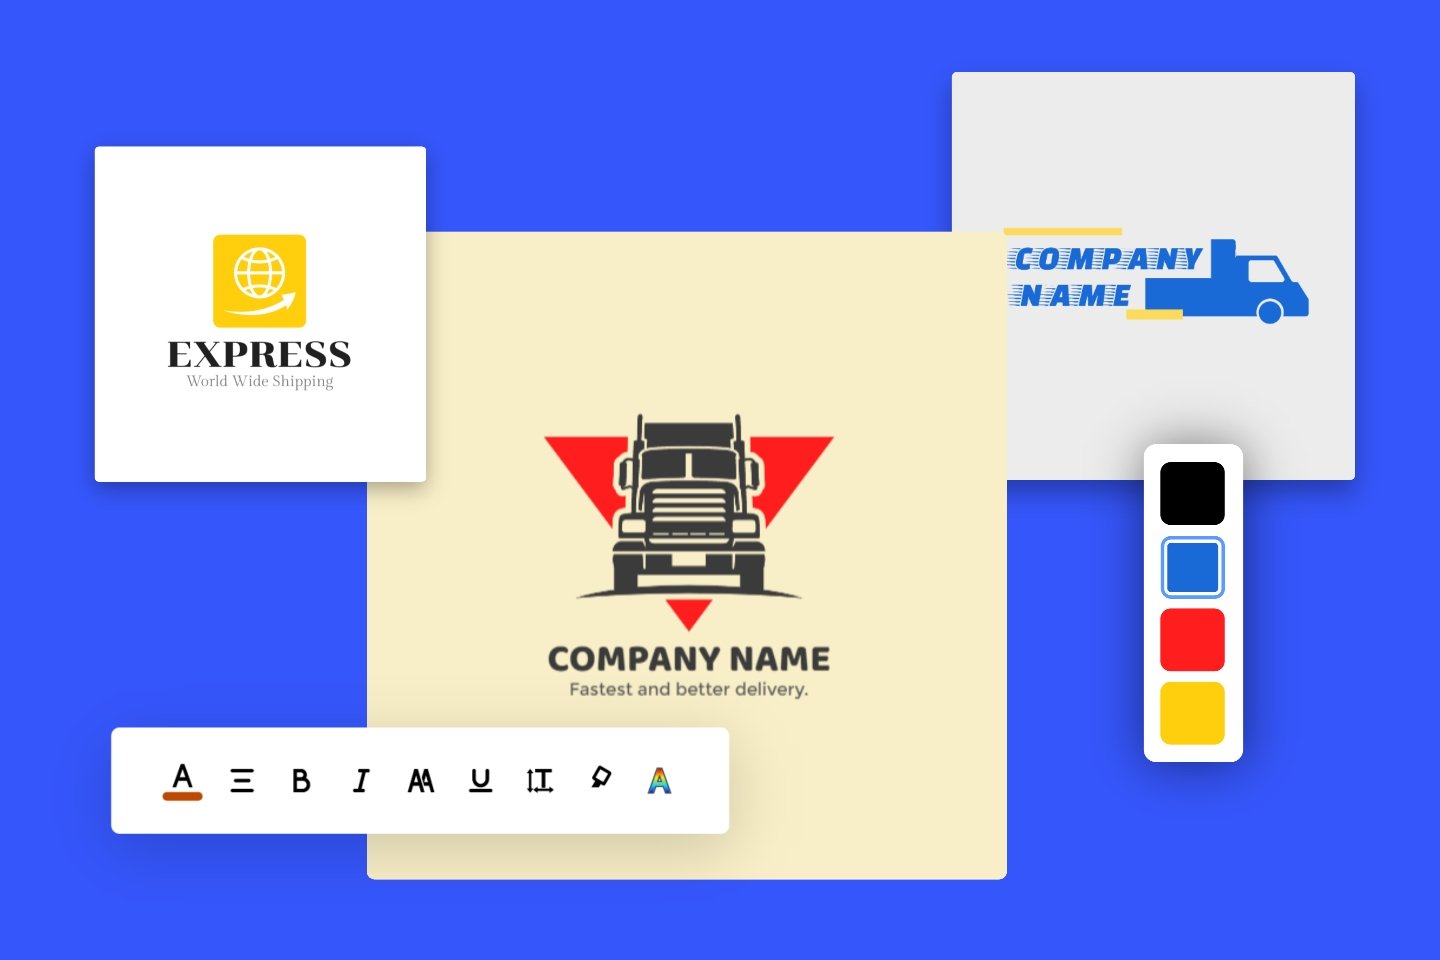 Create Custom Company Business Cards to Personalize your Business